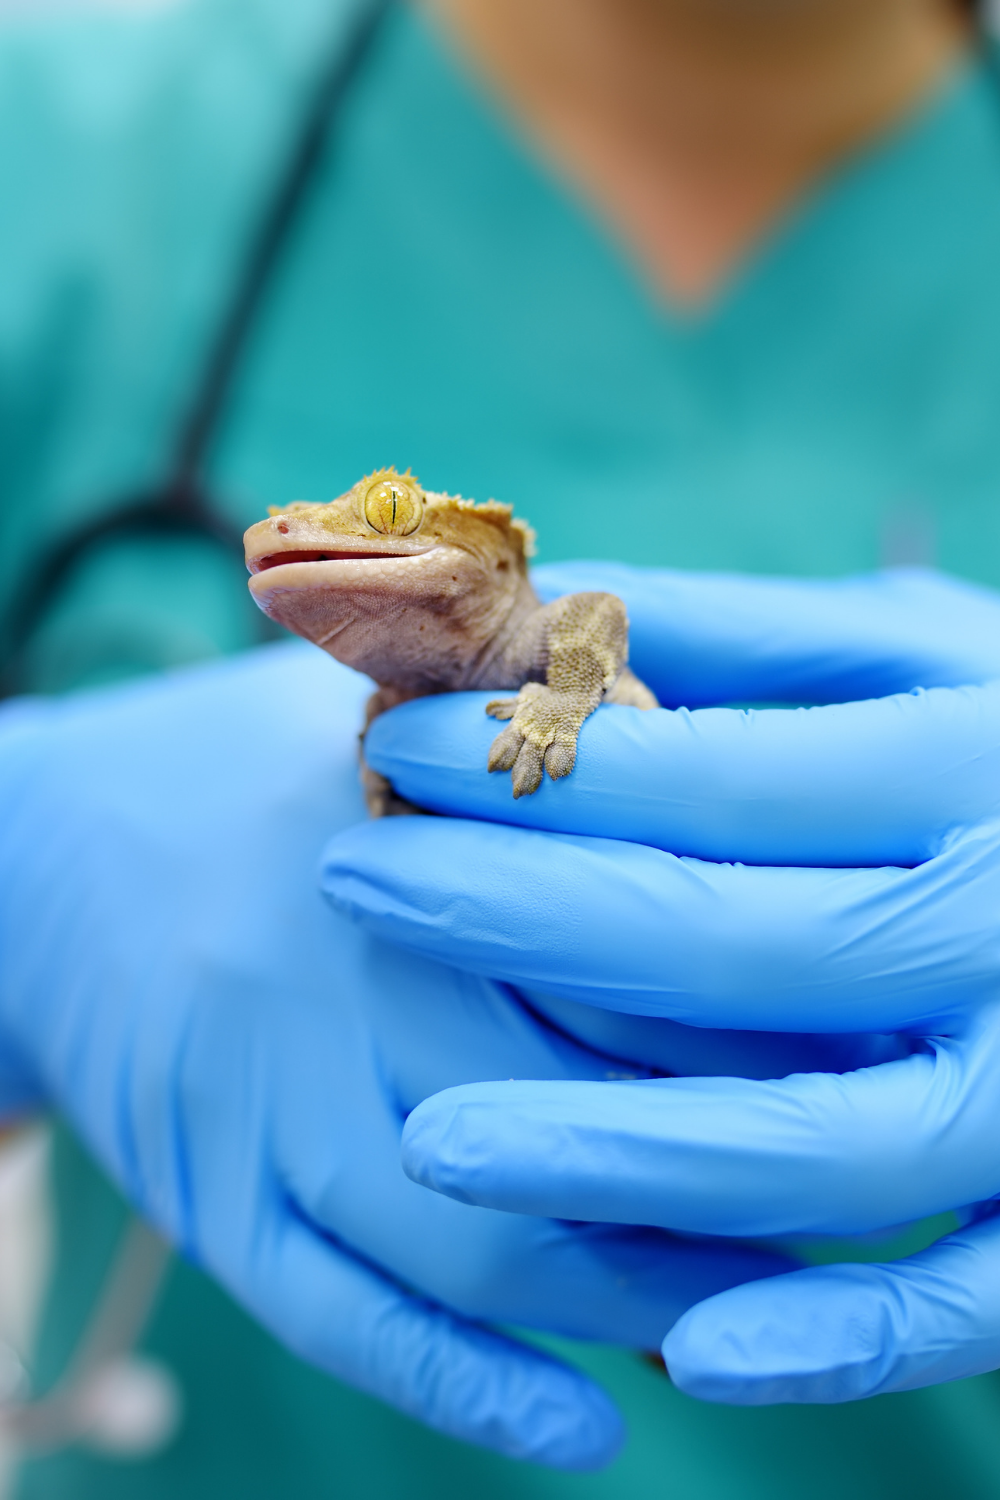 Becoming An Exotic Animal Veterinarian: Here’s A Head Start